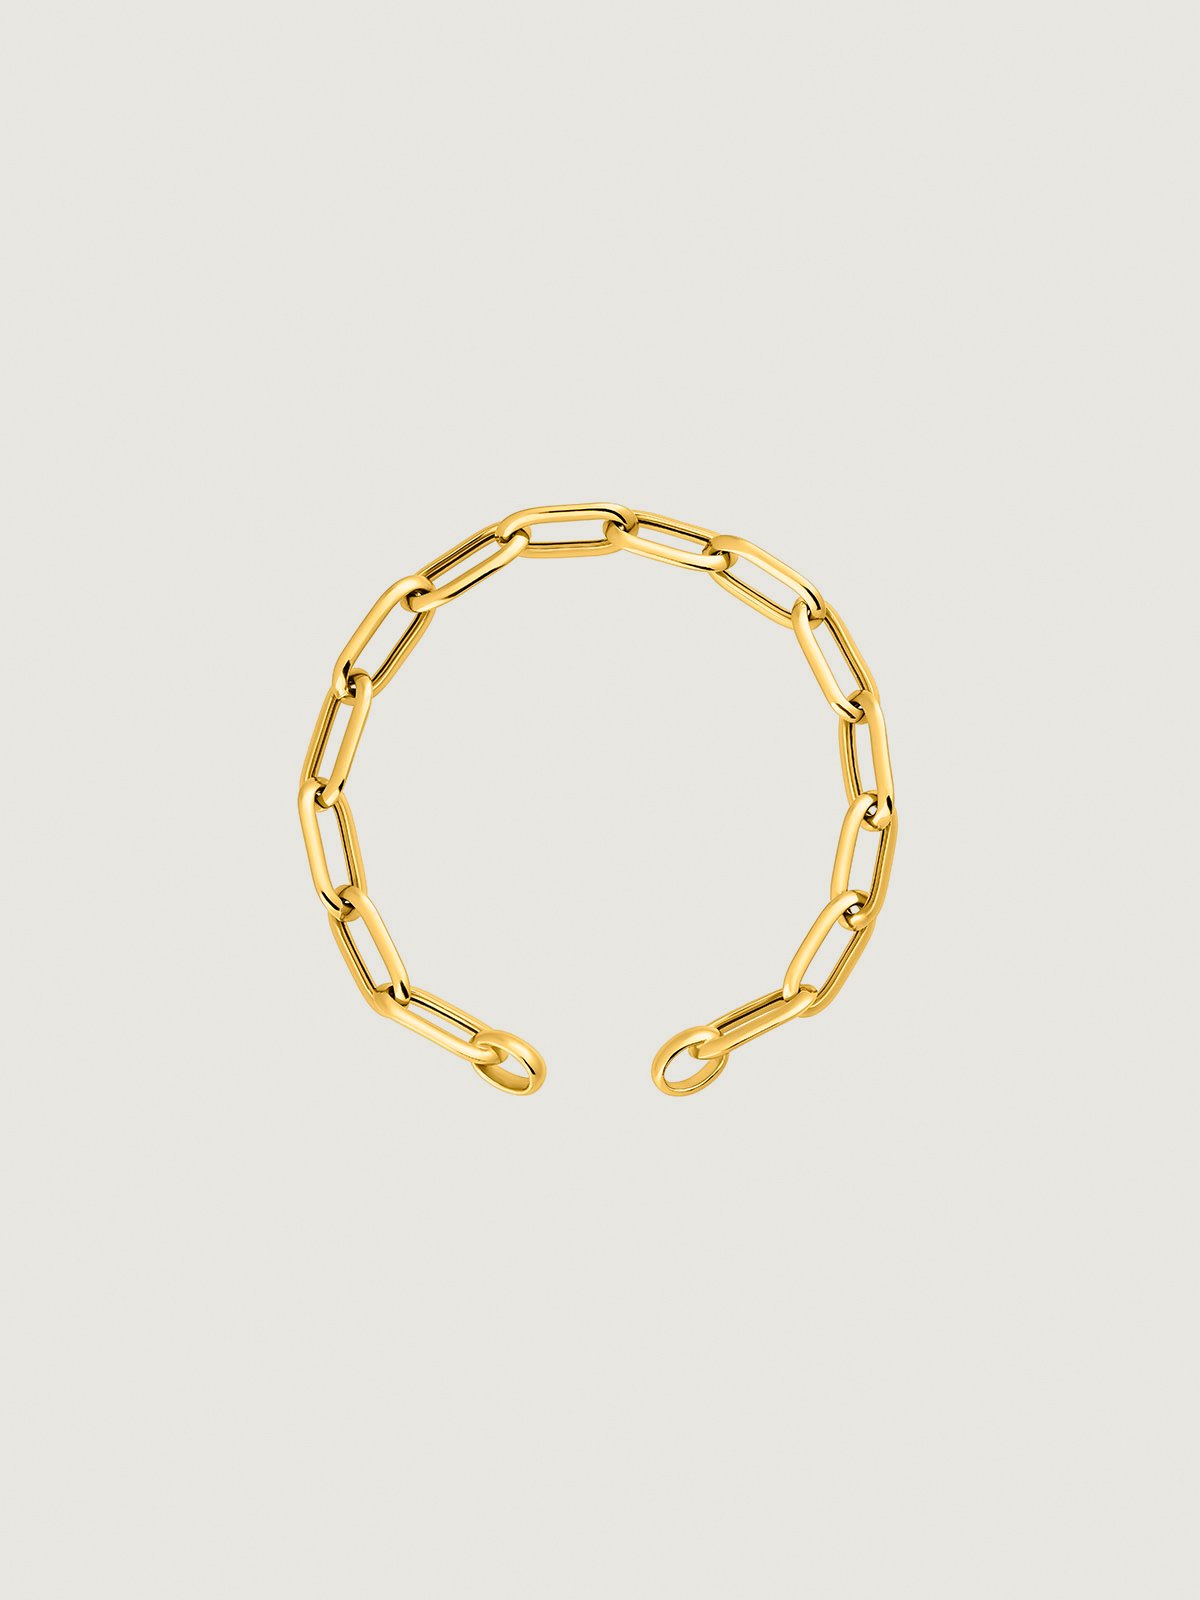 Rectangle Forza link bracelet made from 925 silver coated in 18K yellow gold